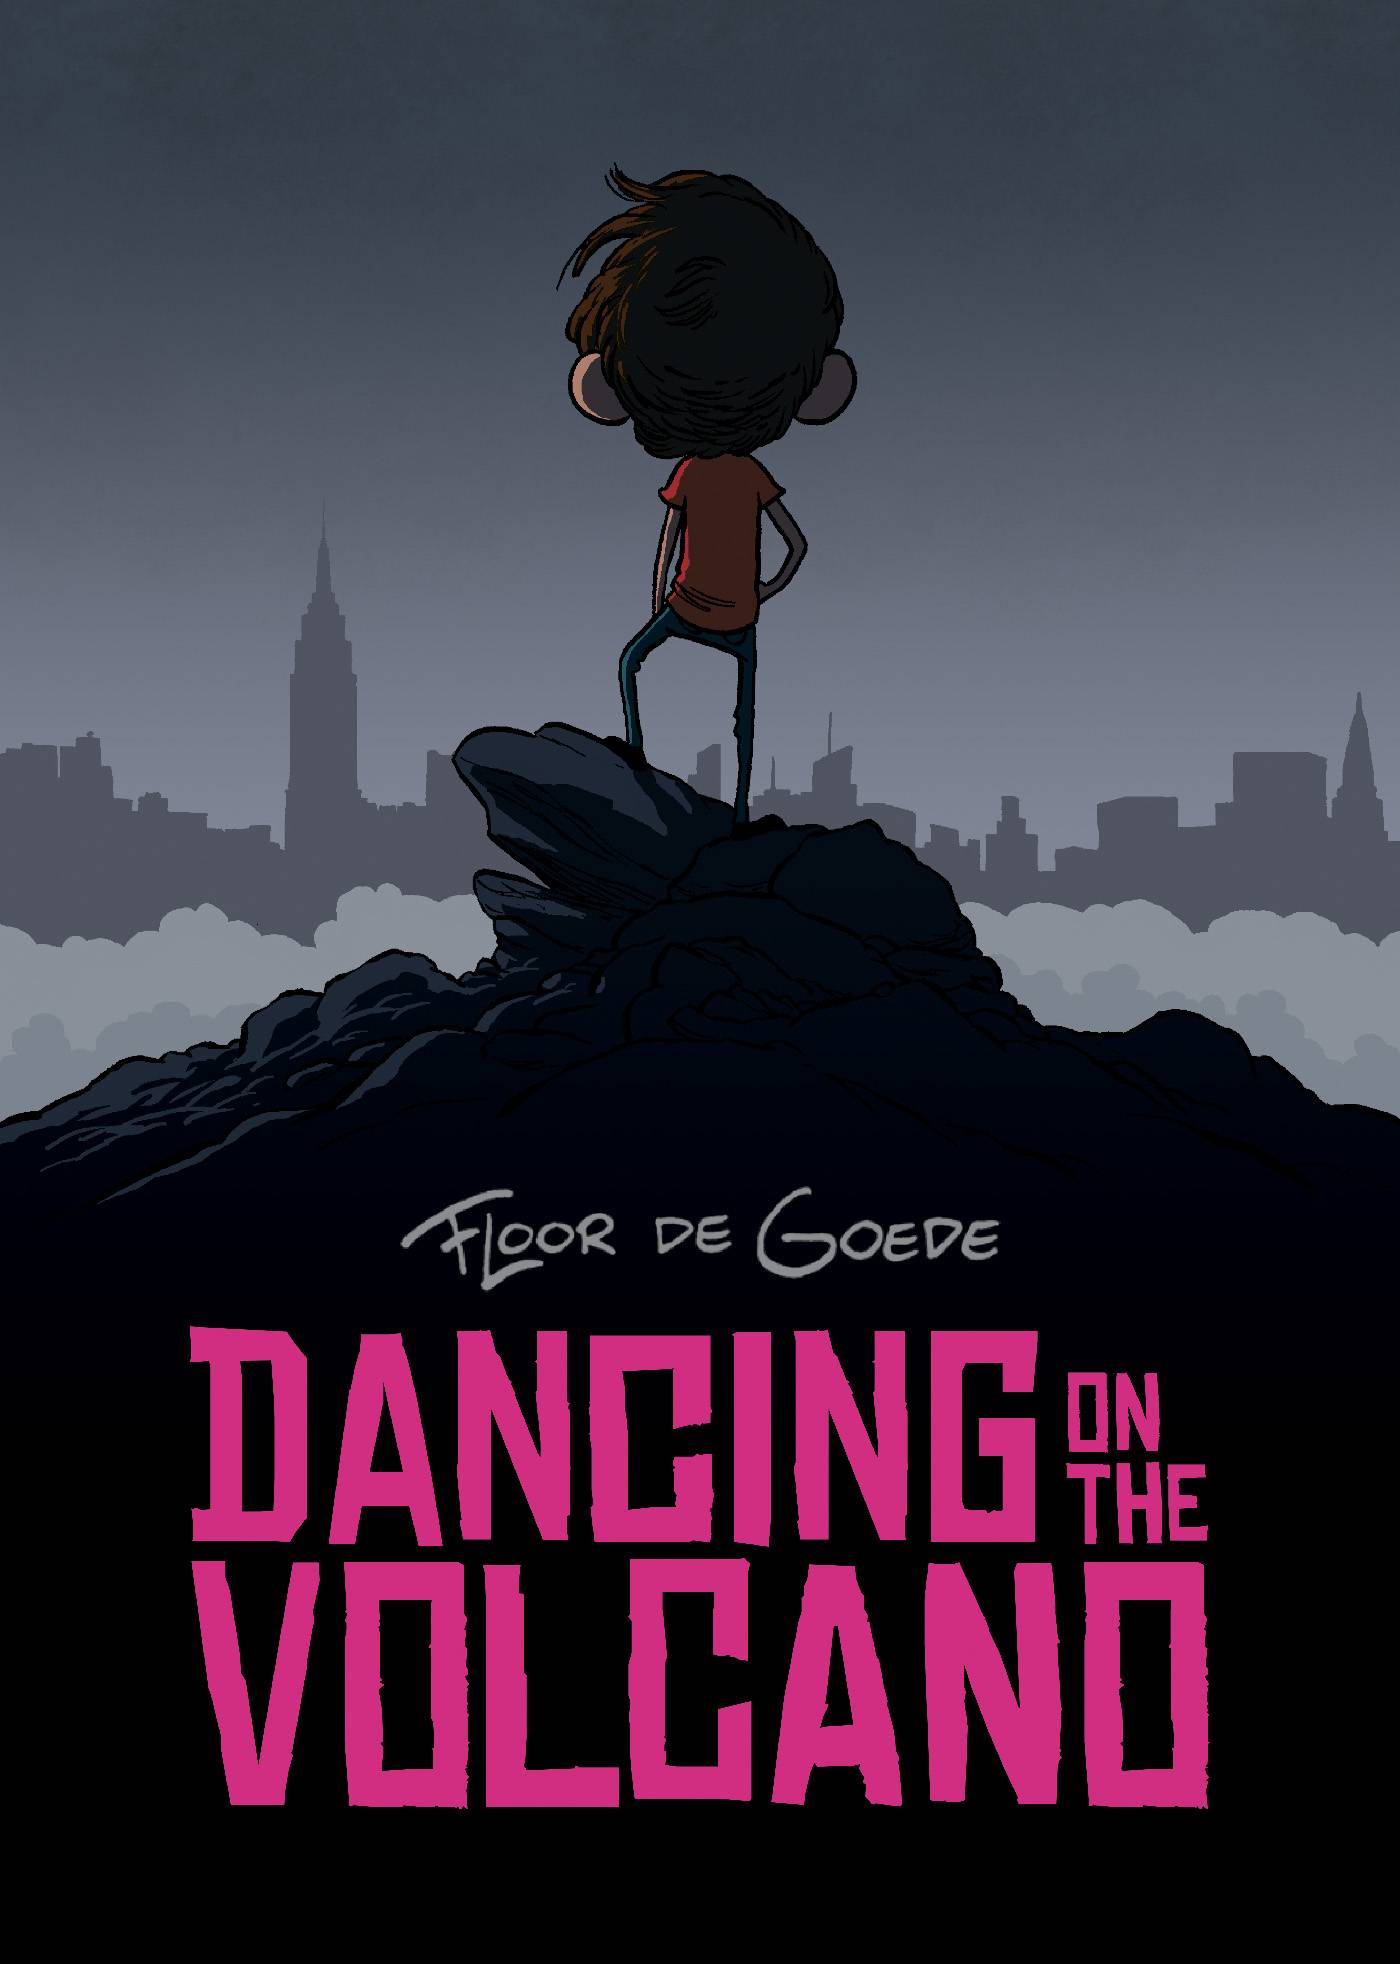 DANCING ON THE VOLCANO TP